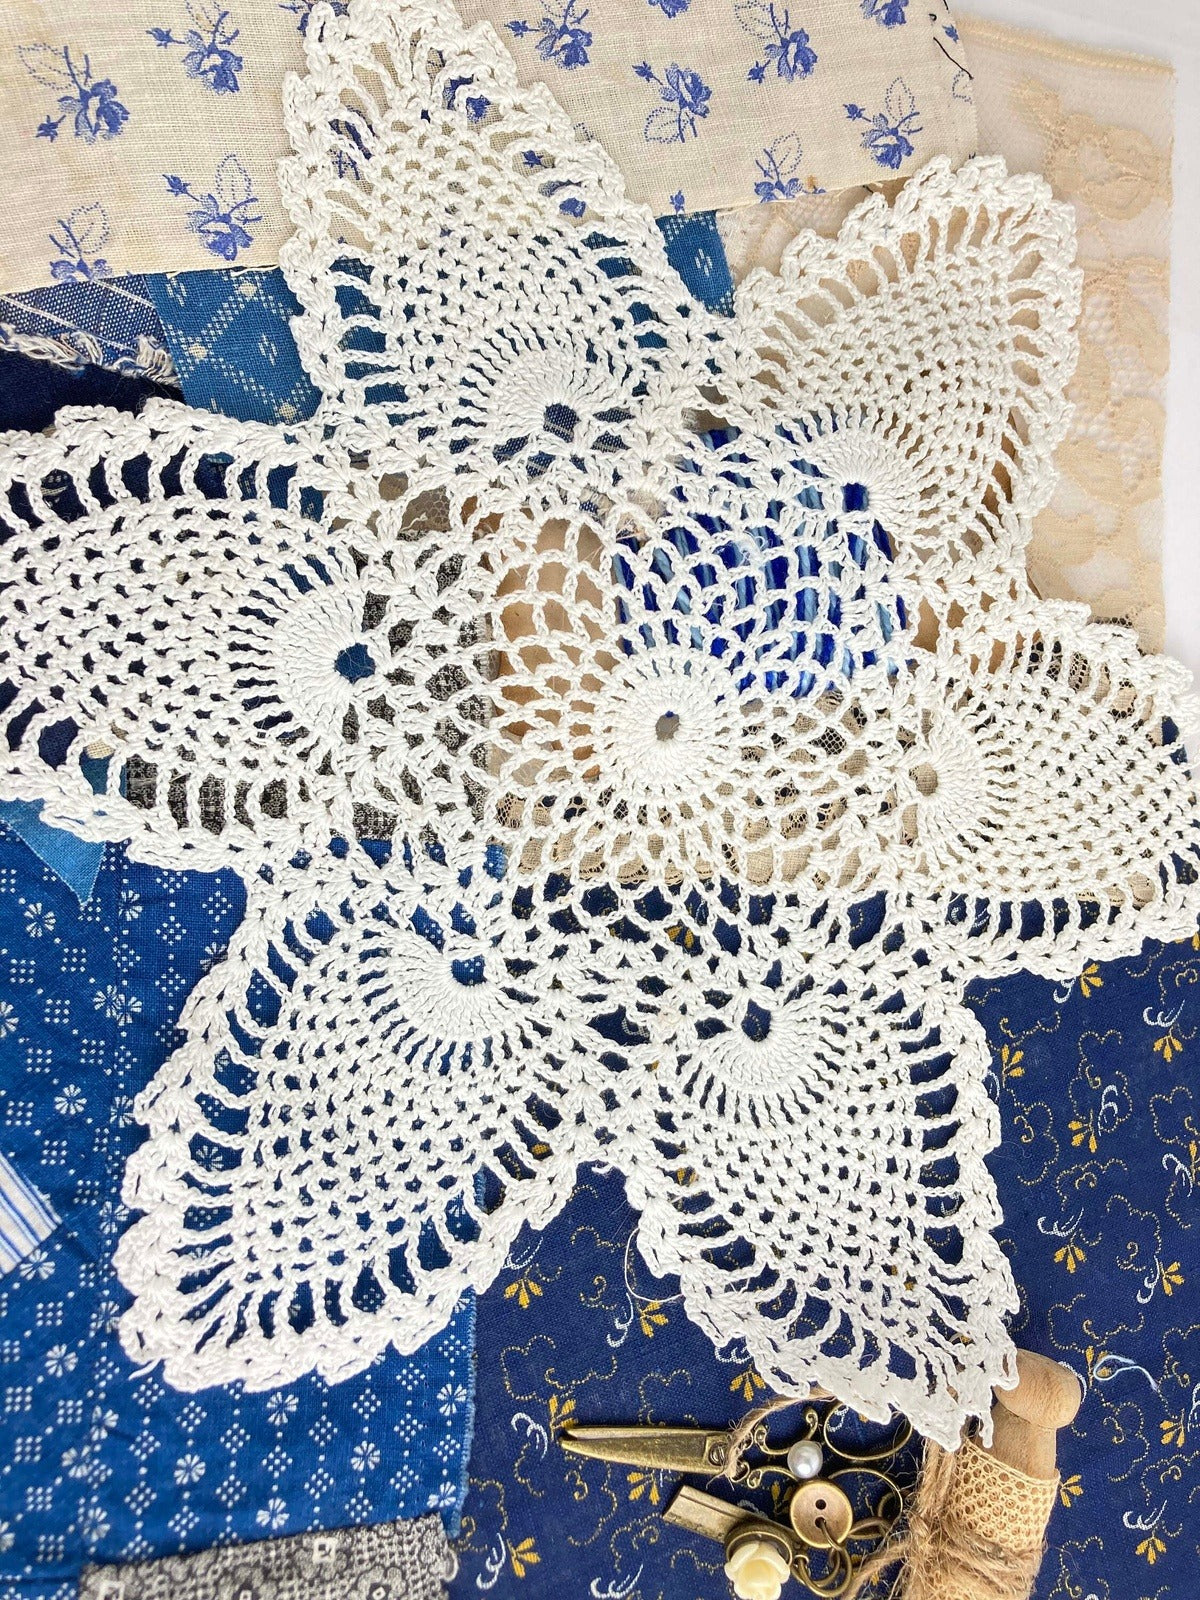 Indigo Blue Quilt Blocks and Trim, Antique Fabric and Lace Assortment, 1800s to 1920, Vintage Textiles  | for Junk Journals or slow stitch